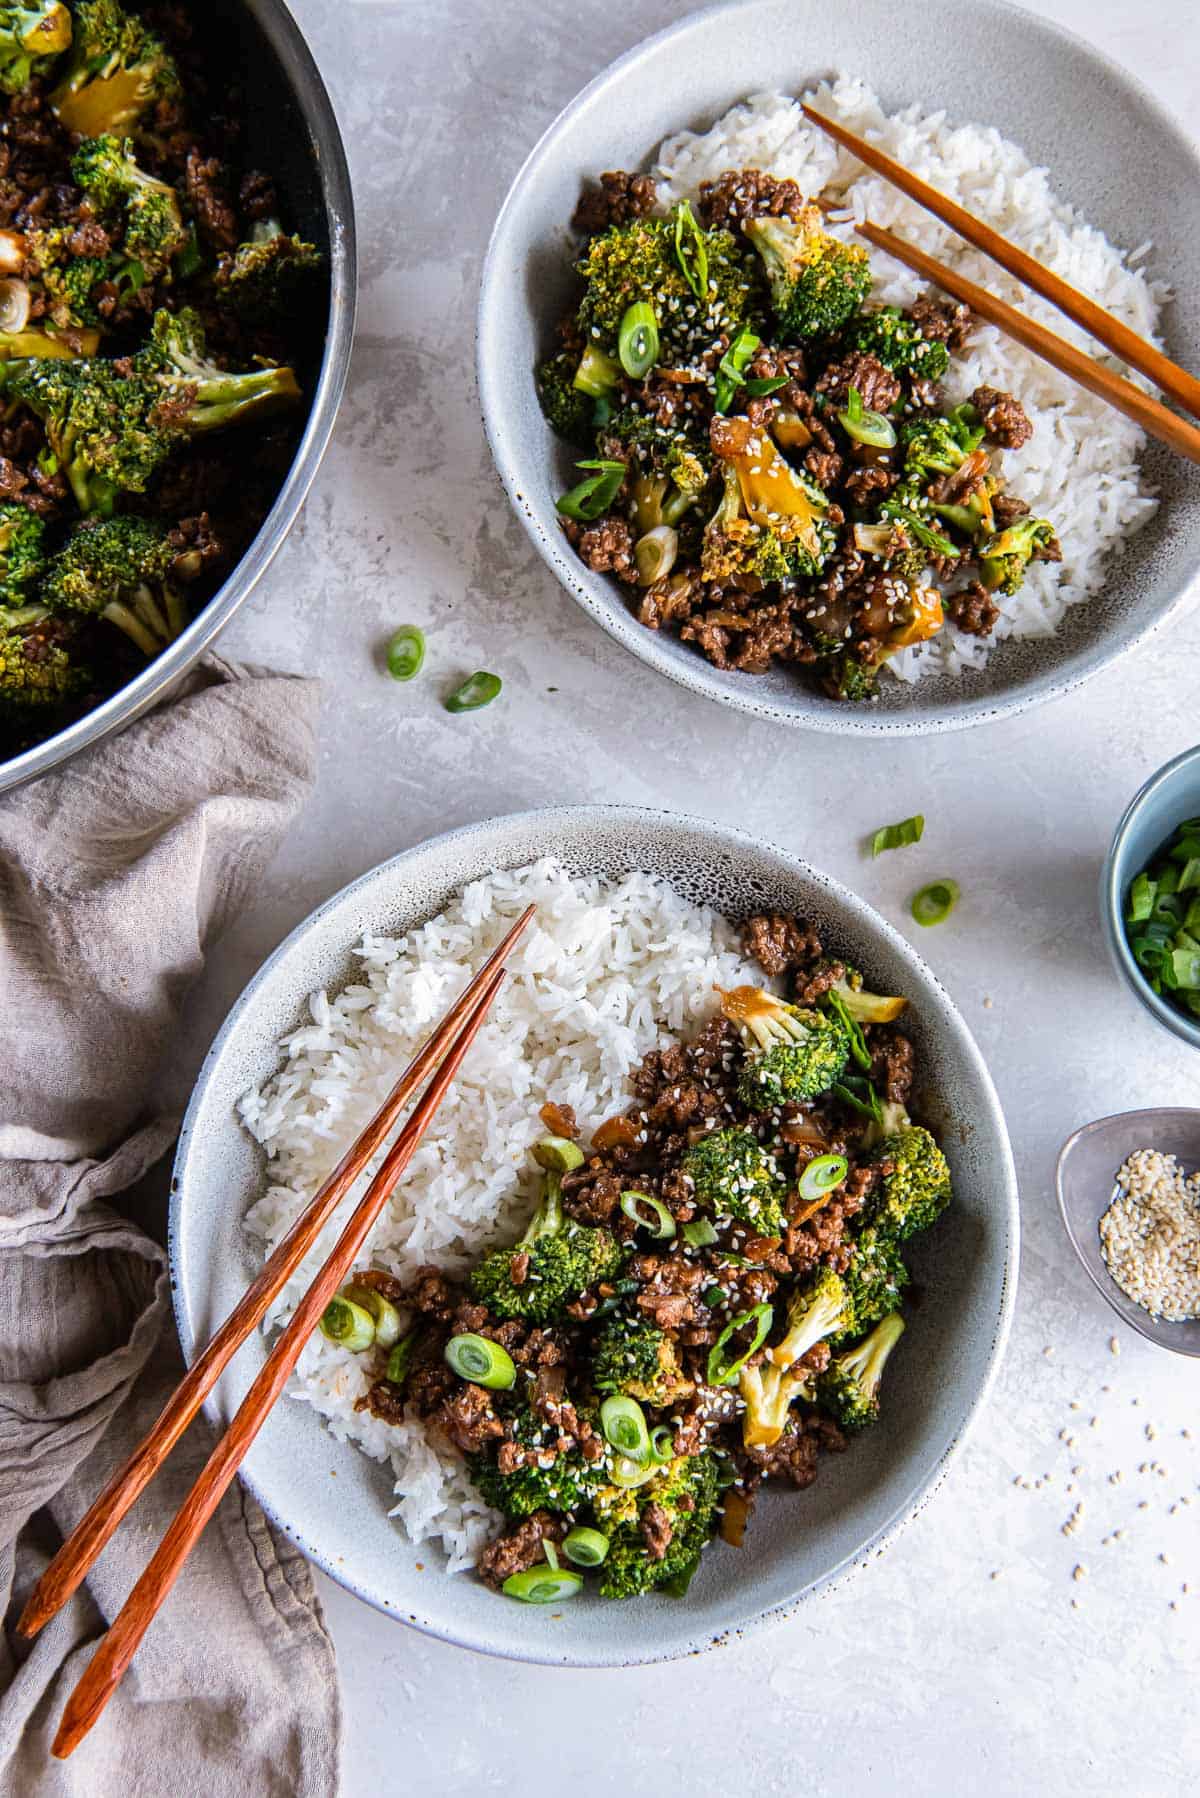 Chopsticks resting on two bowls with white rice and ground beef and broccoli.